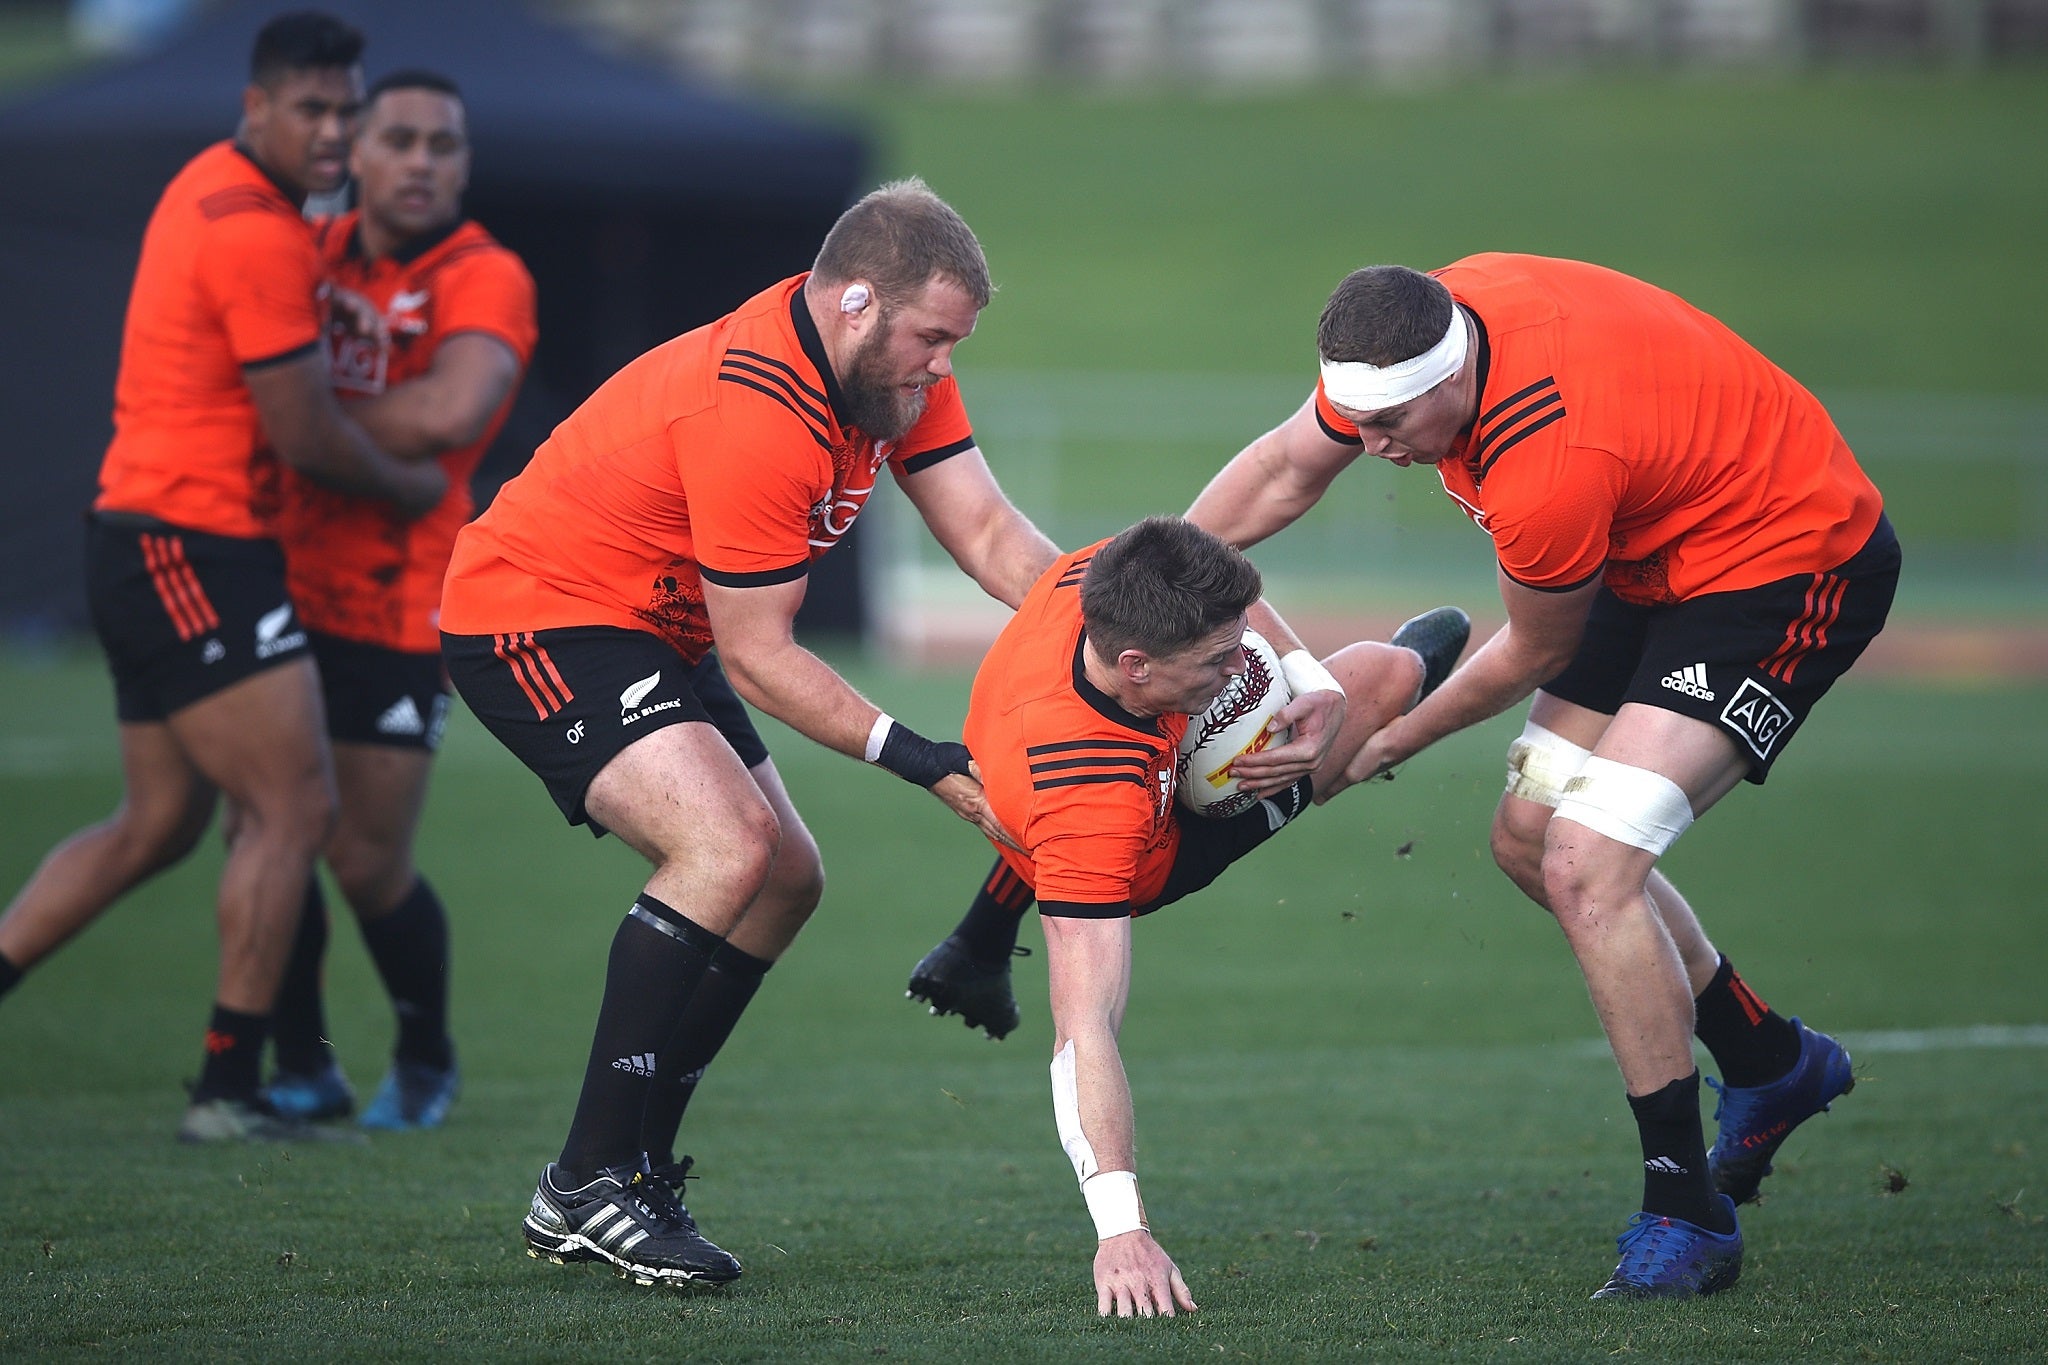 Beauden Barrett is upended by Owen Franks and Brodie Retallick in training